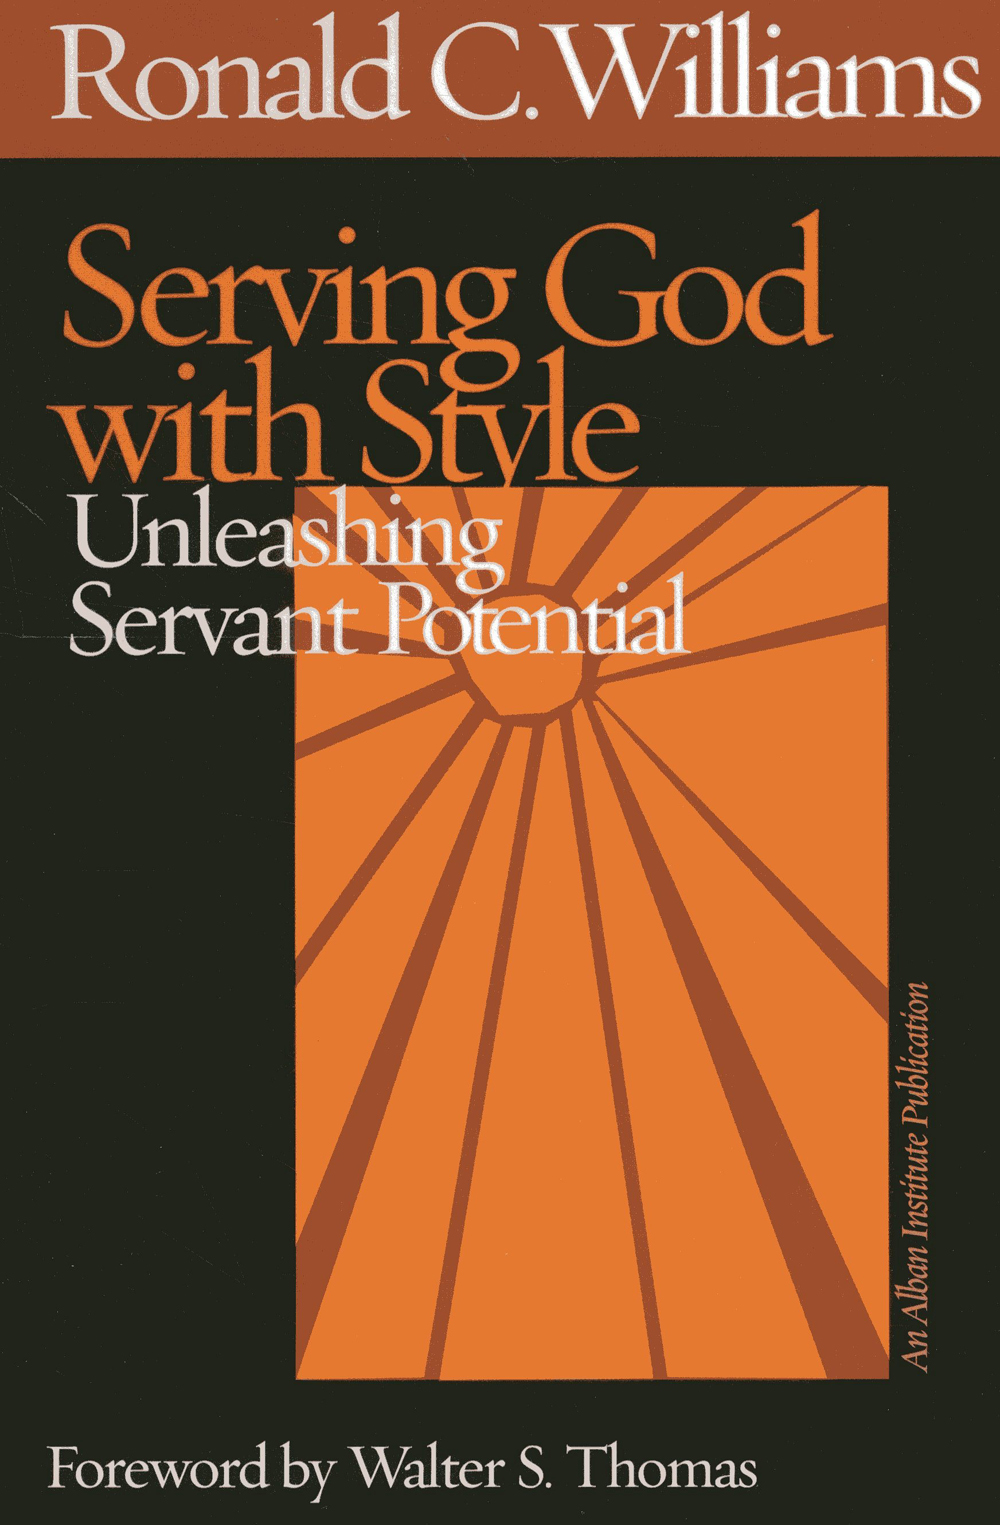 Serving God with Style: Unleashing Servant Potential